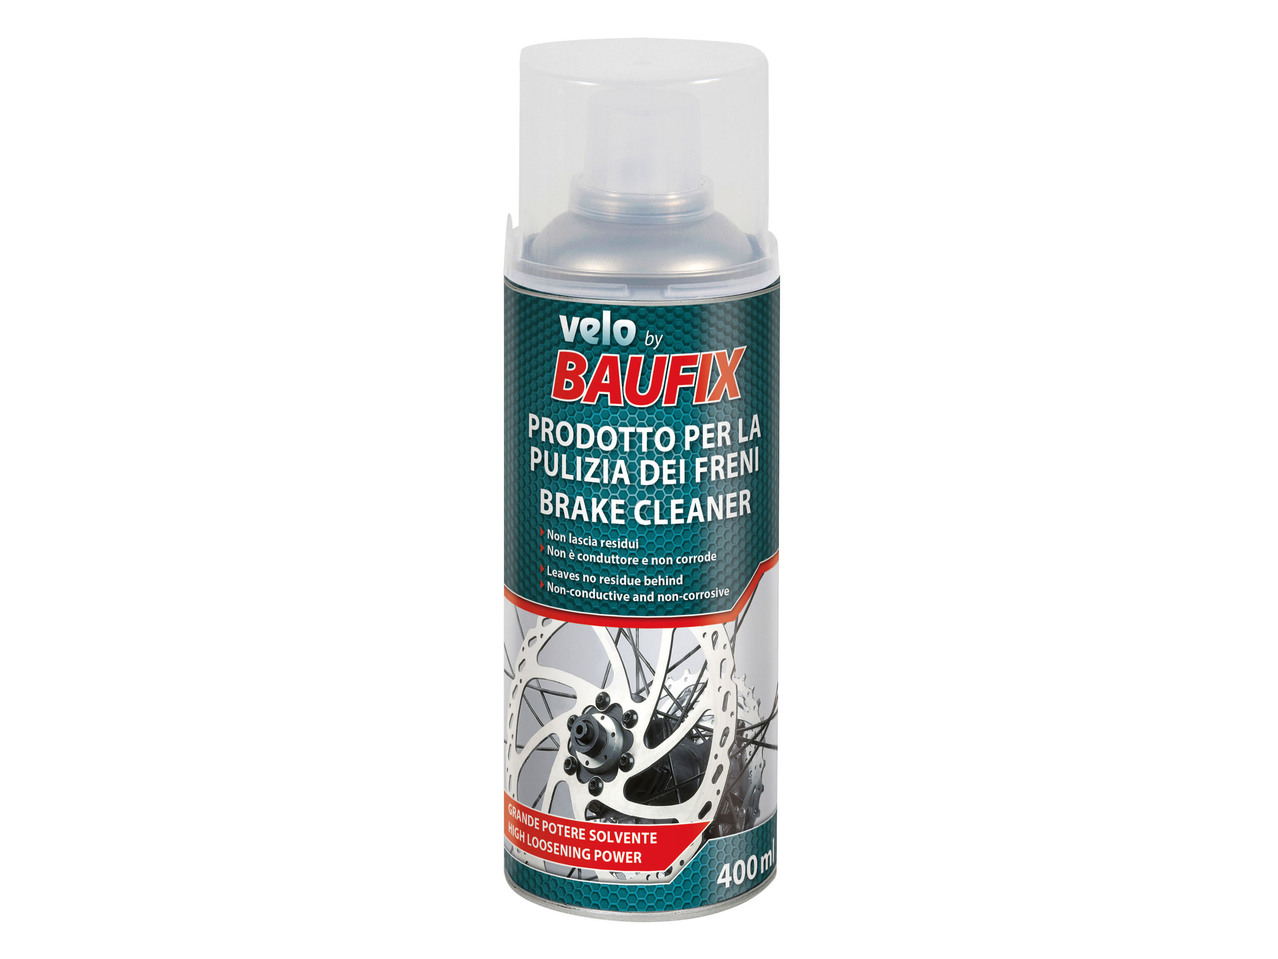 Cycle Maintenance Products